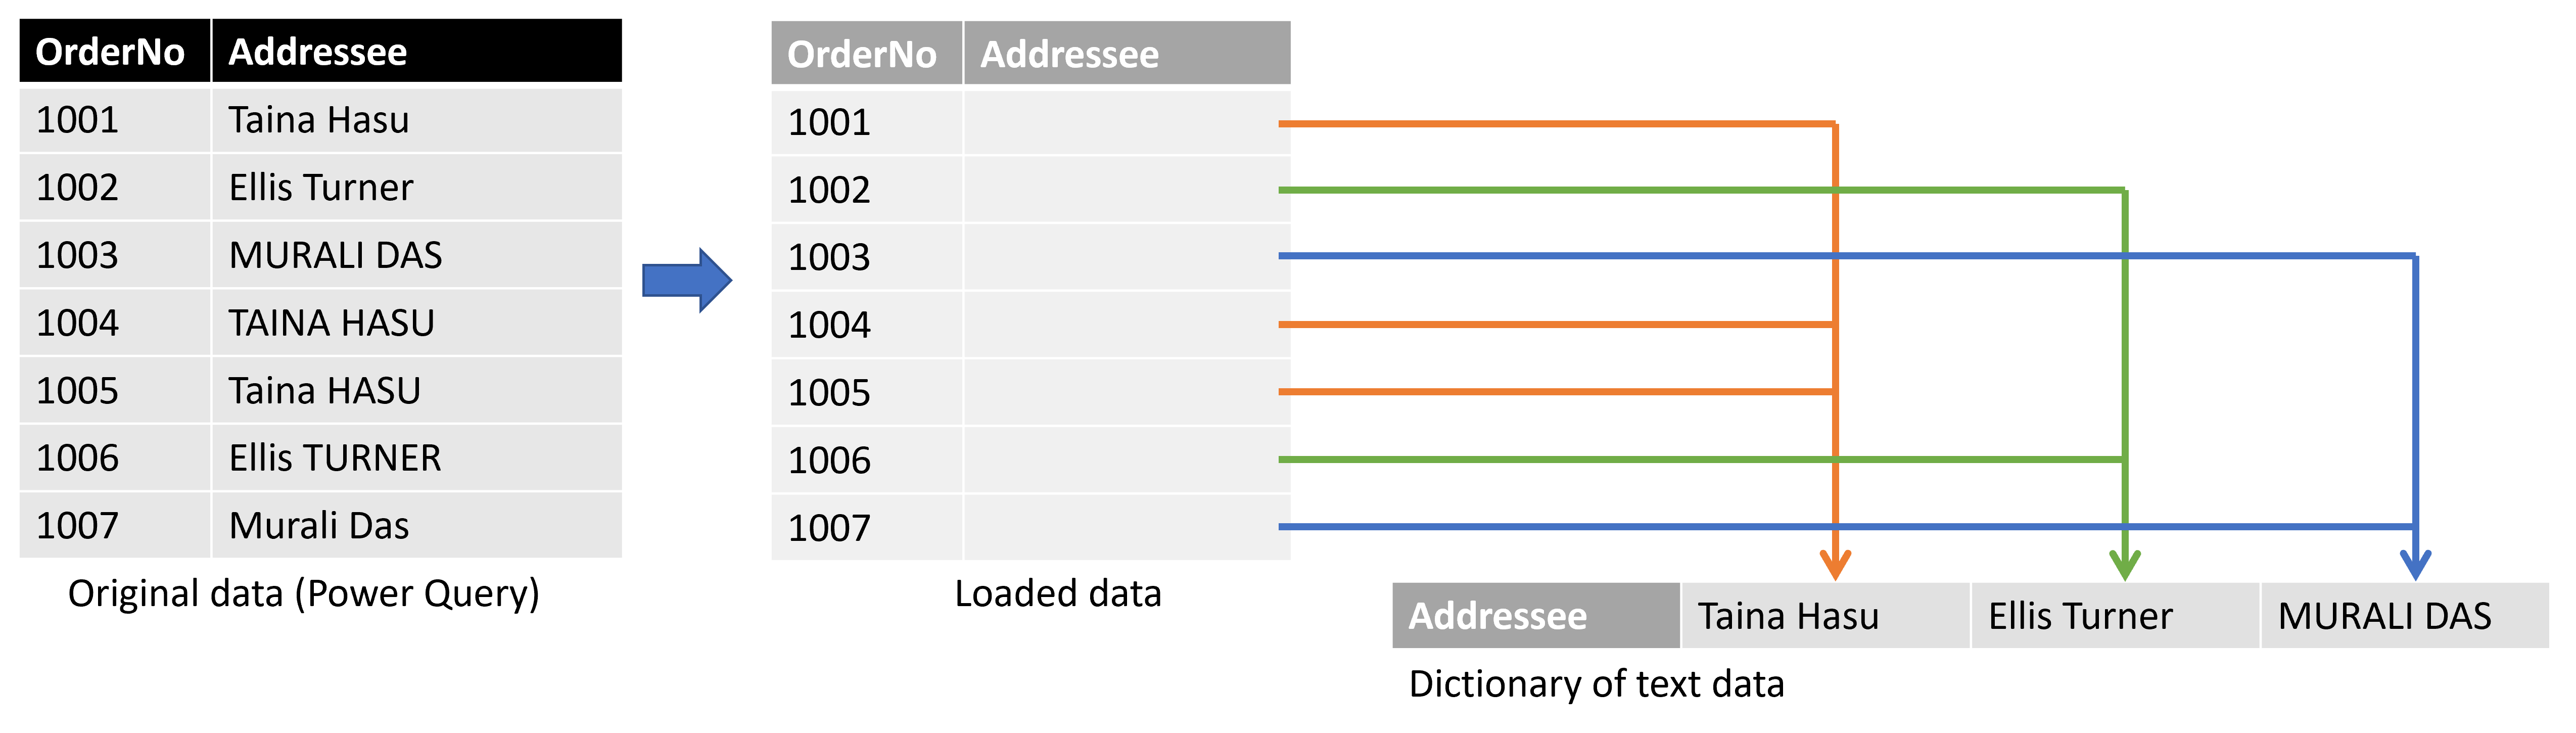 Depiction of the data load process and mapping text values to a dictionary of unique values